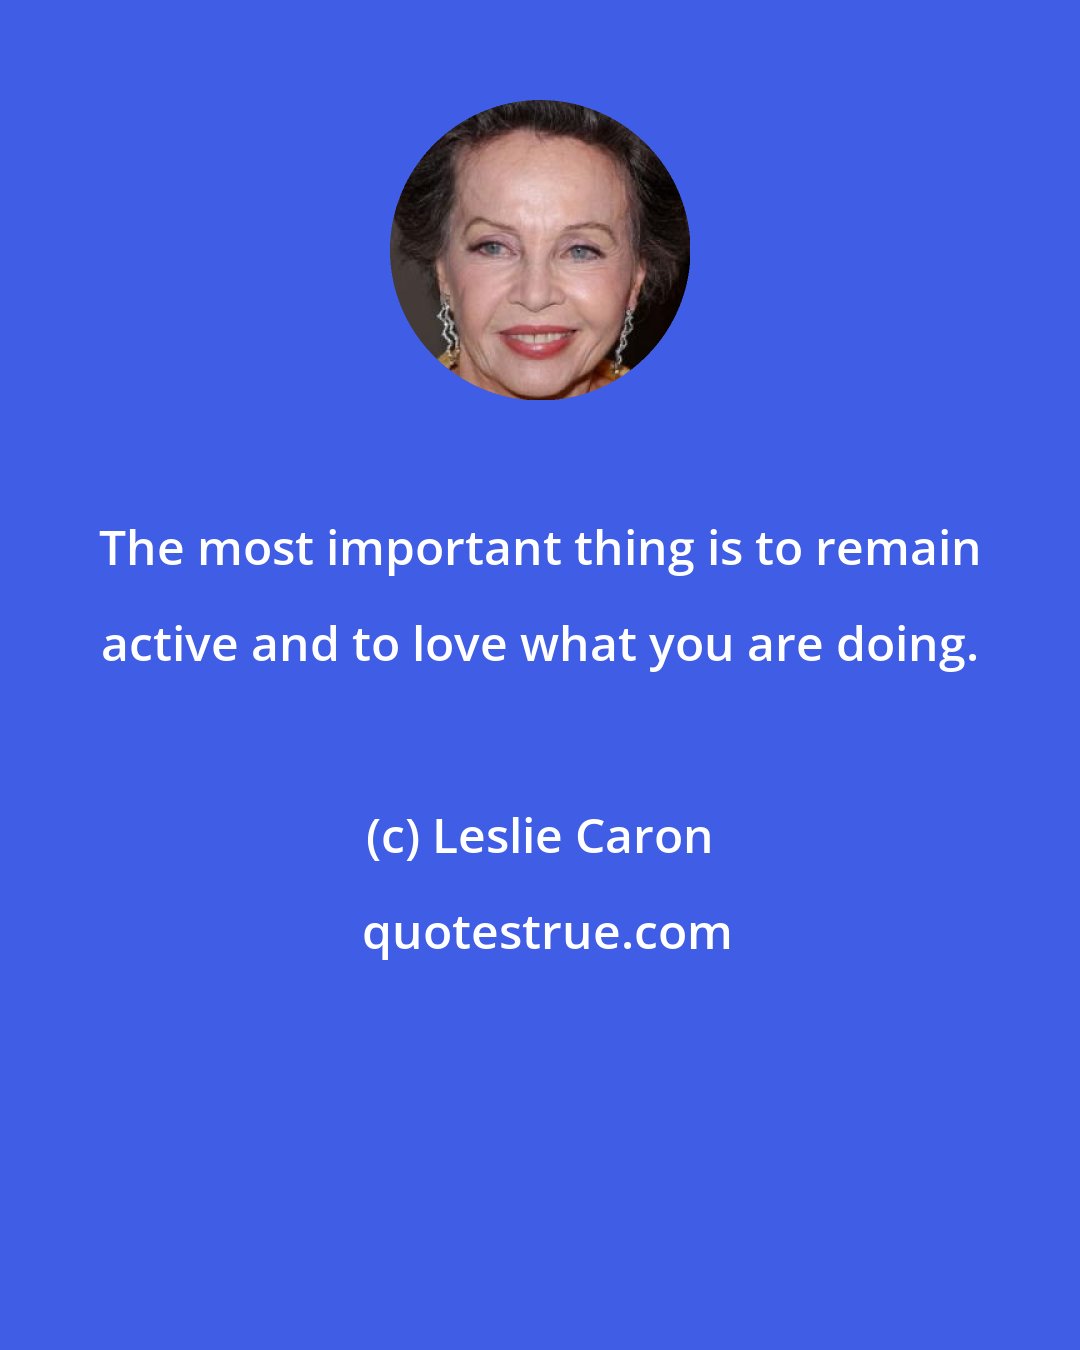 Leslie Caron: The most important thing is to remain active and to love what you are doing.